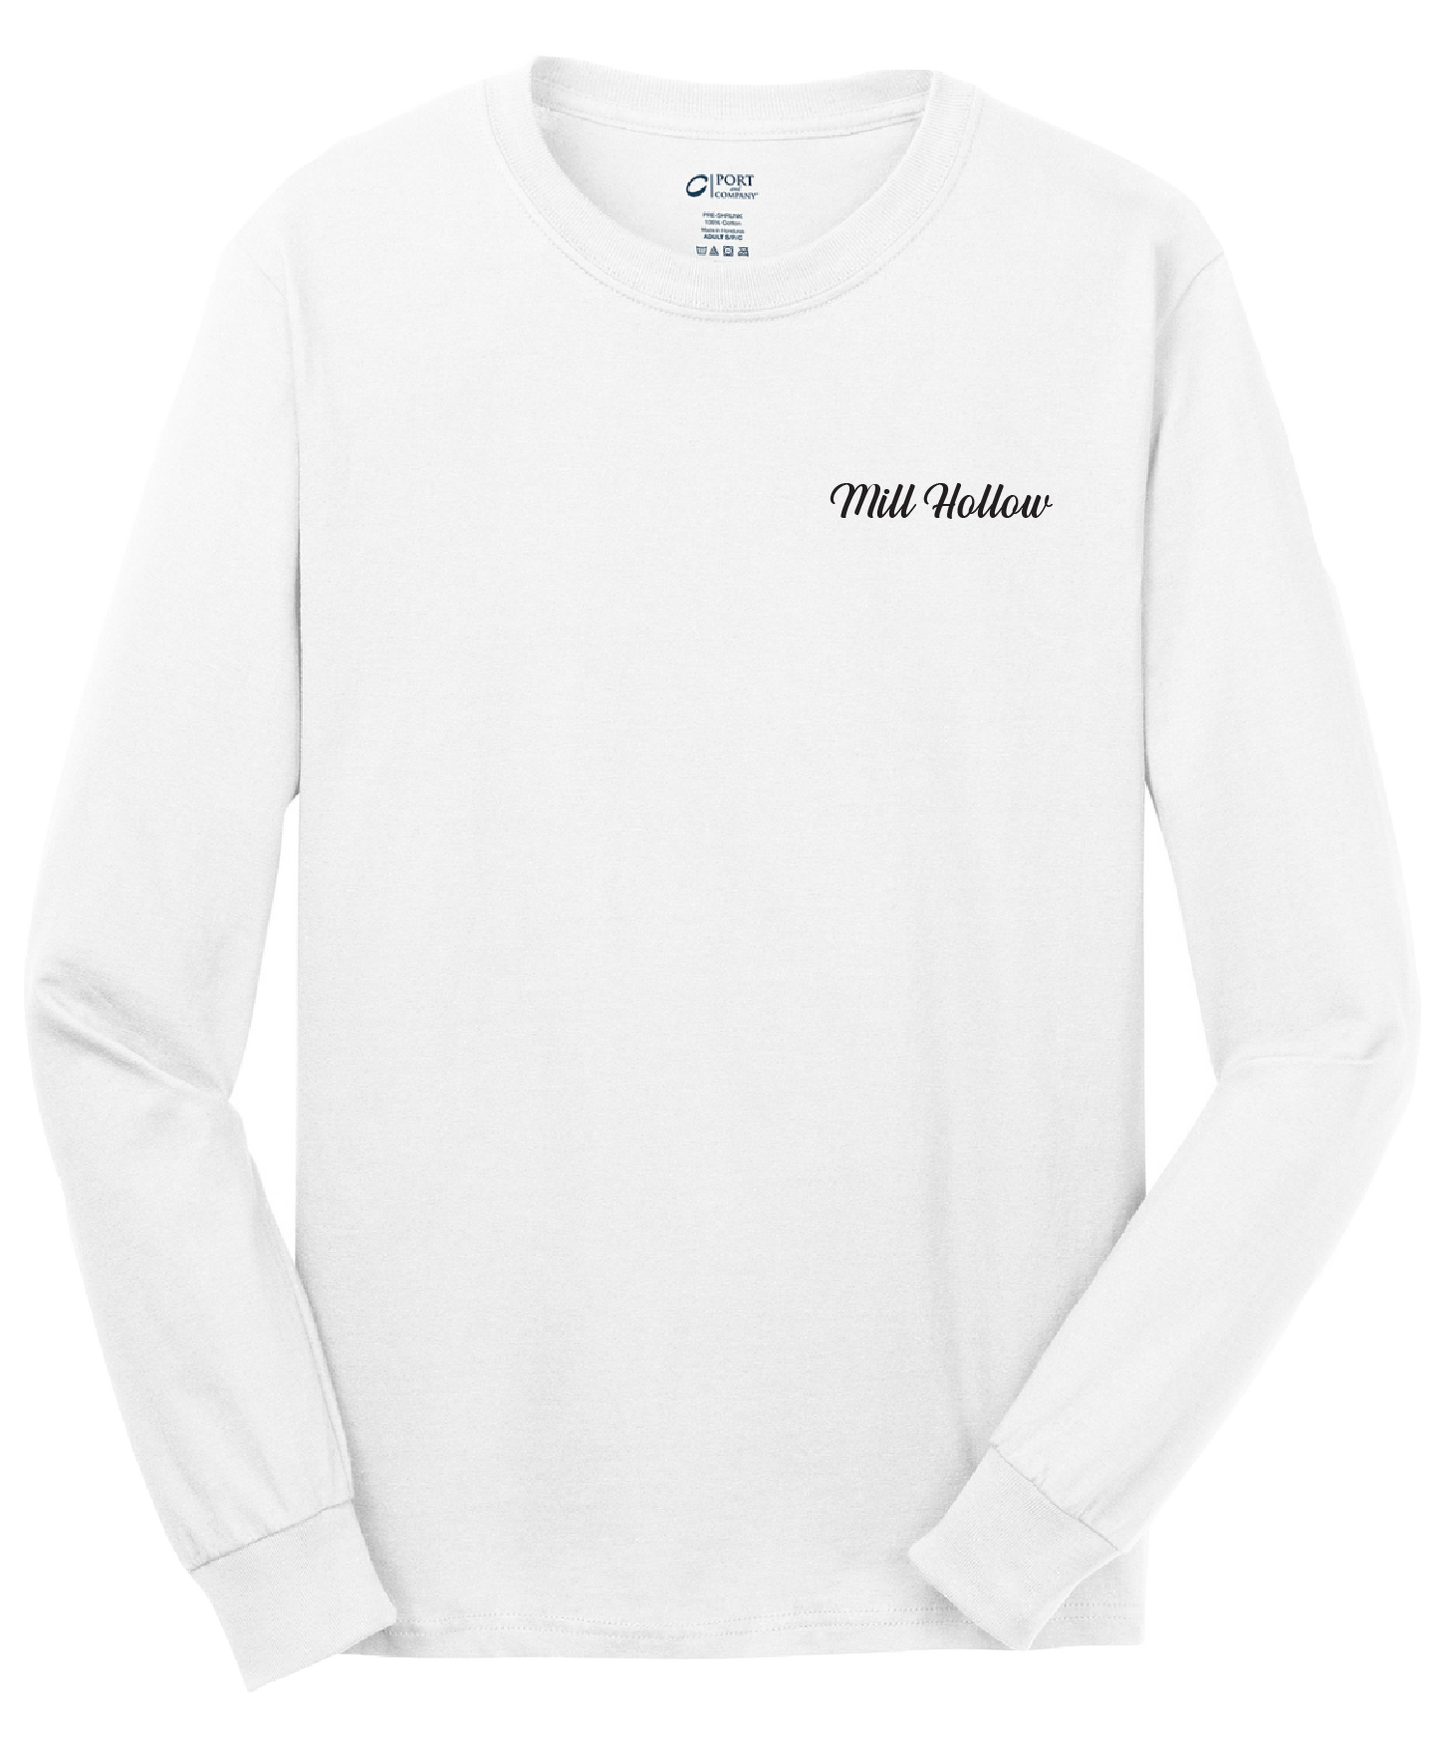 Mill Hollow - Mens - Port & Company® - Long Sleeve Core Cotton Tee